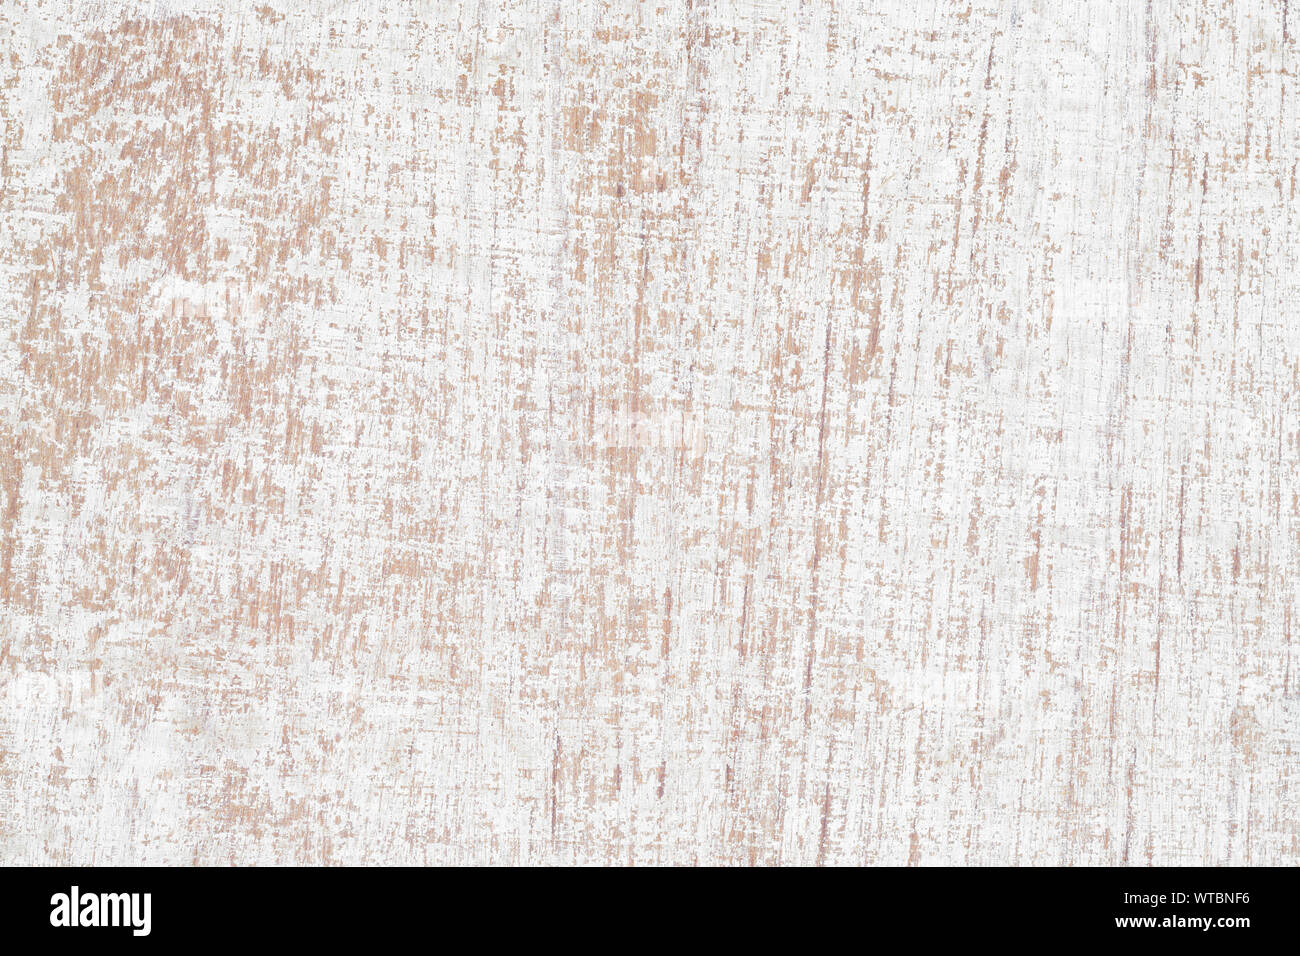 Grunge background. Peeling white paint on an old wooden background. rusty weathered wood planks. Stock Photo